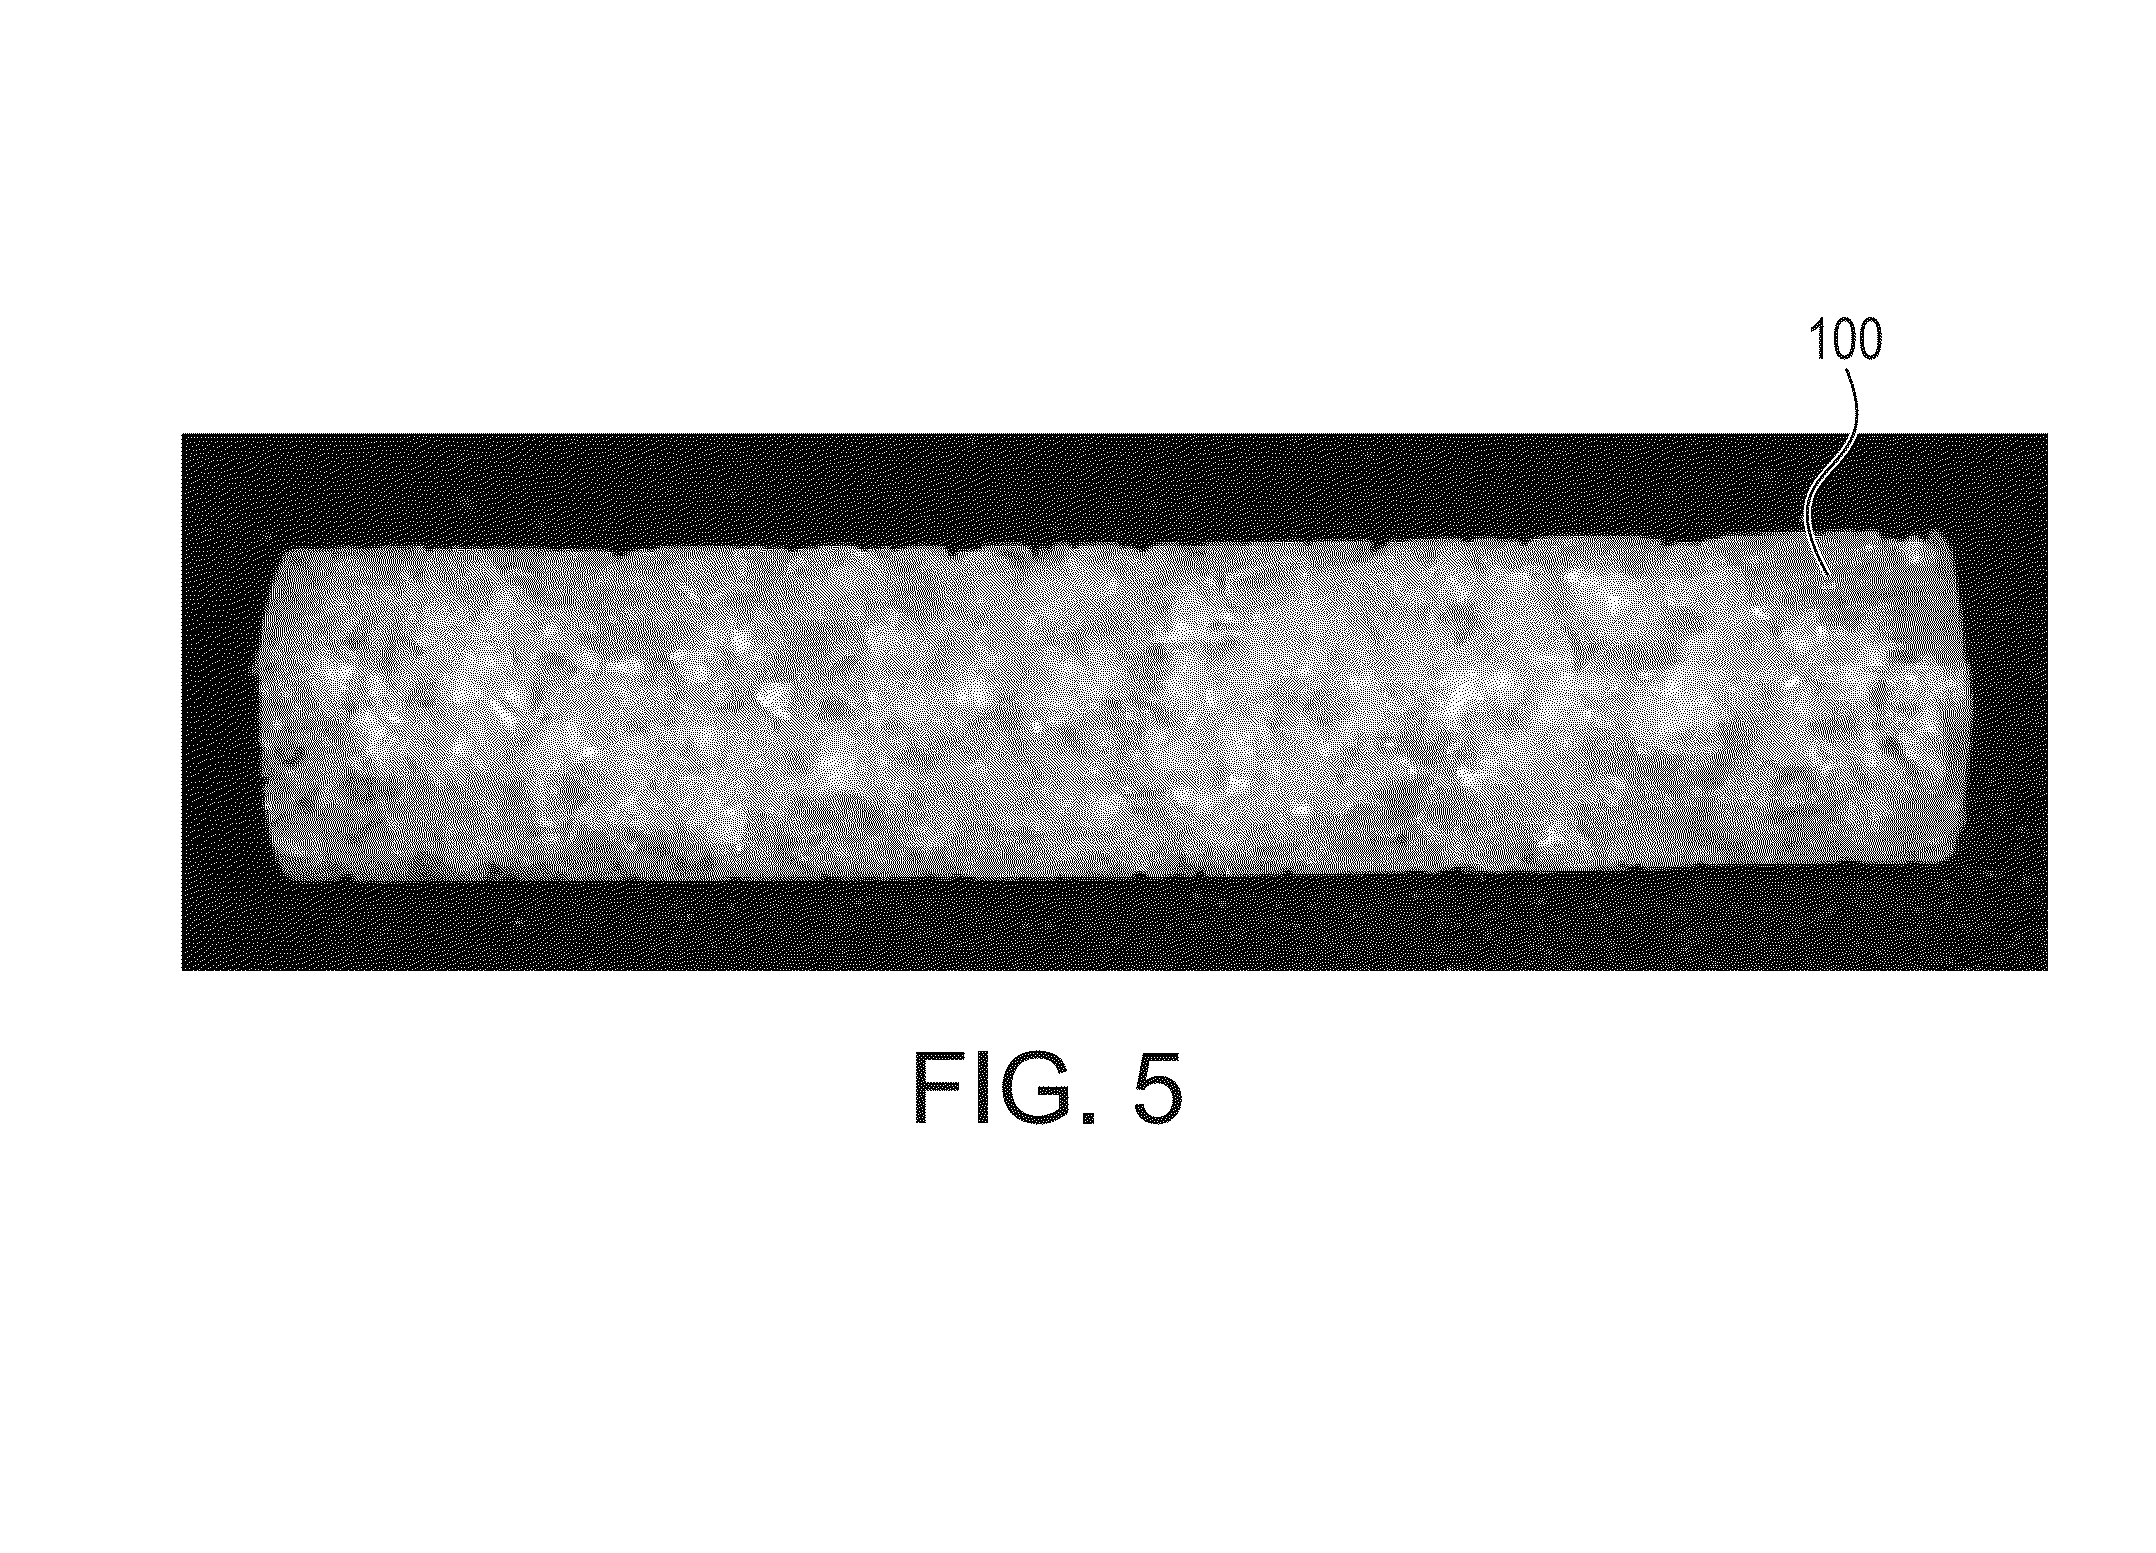 Modified porous materials and methods of creating interconnected porosity in materials